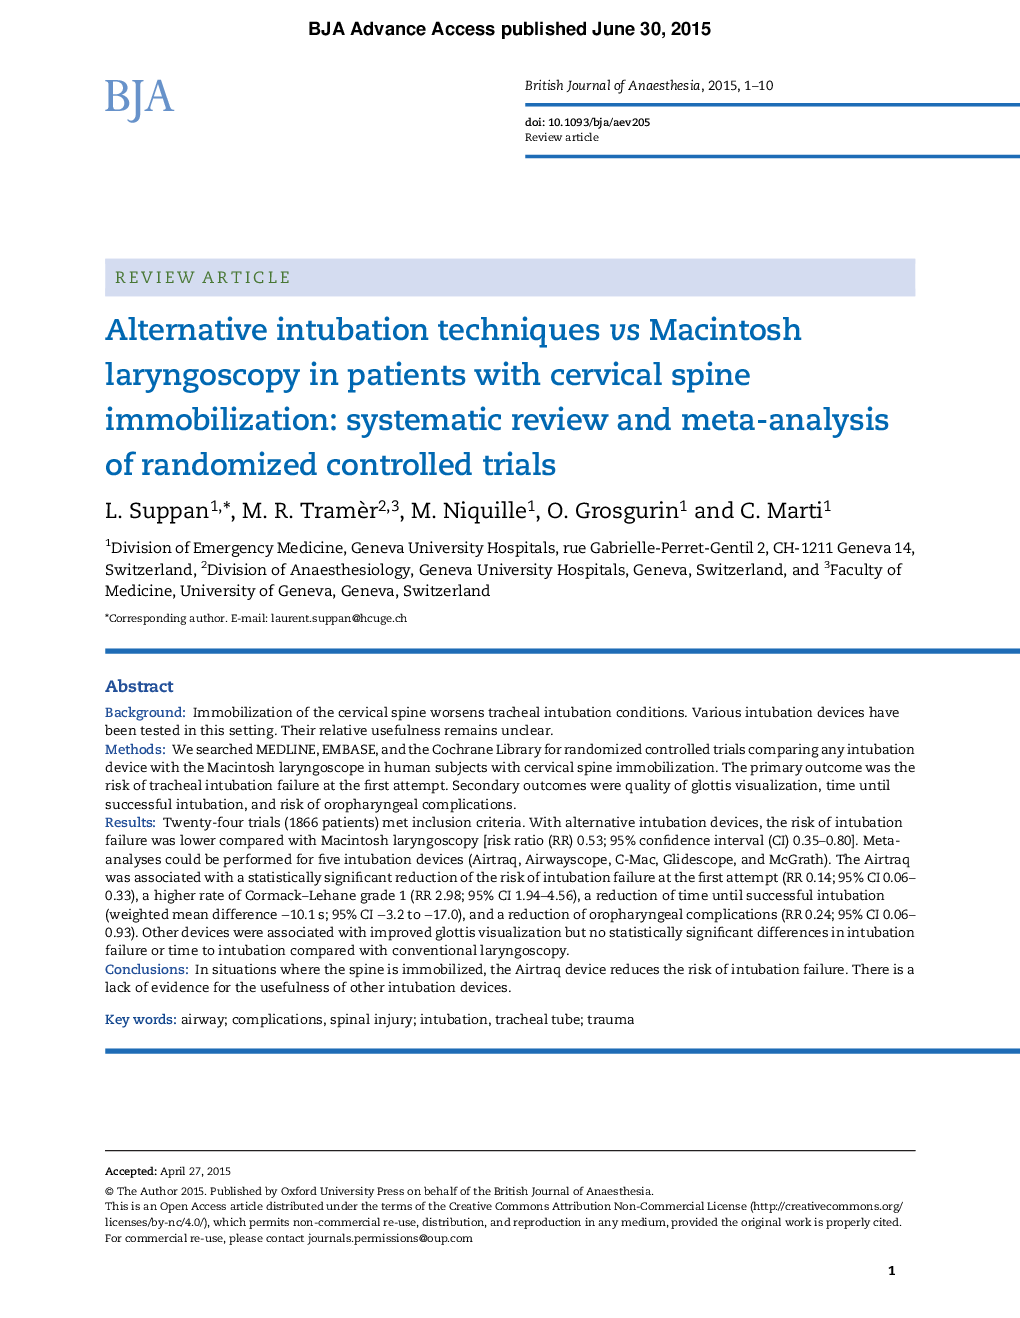 Alternative intubation techniques vs Macintosh laryngoscopy in patients with cervical spine immobilization: systematic review and meta-analysis of randomized controlled trials